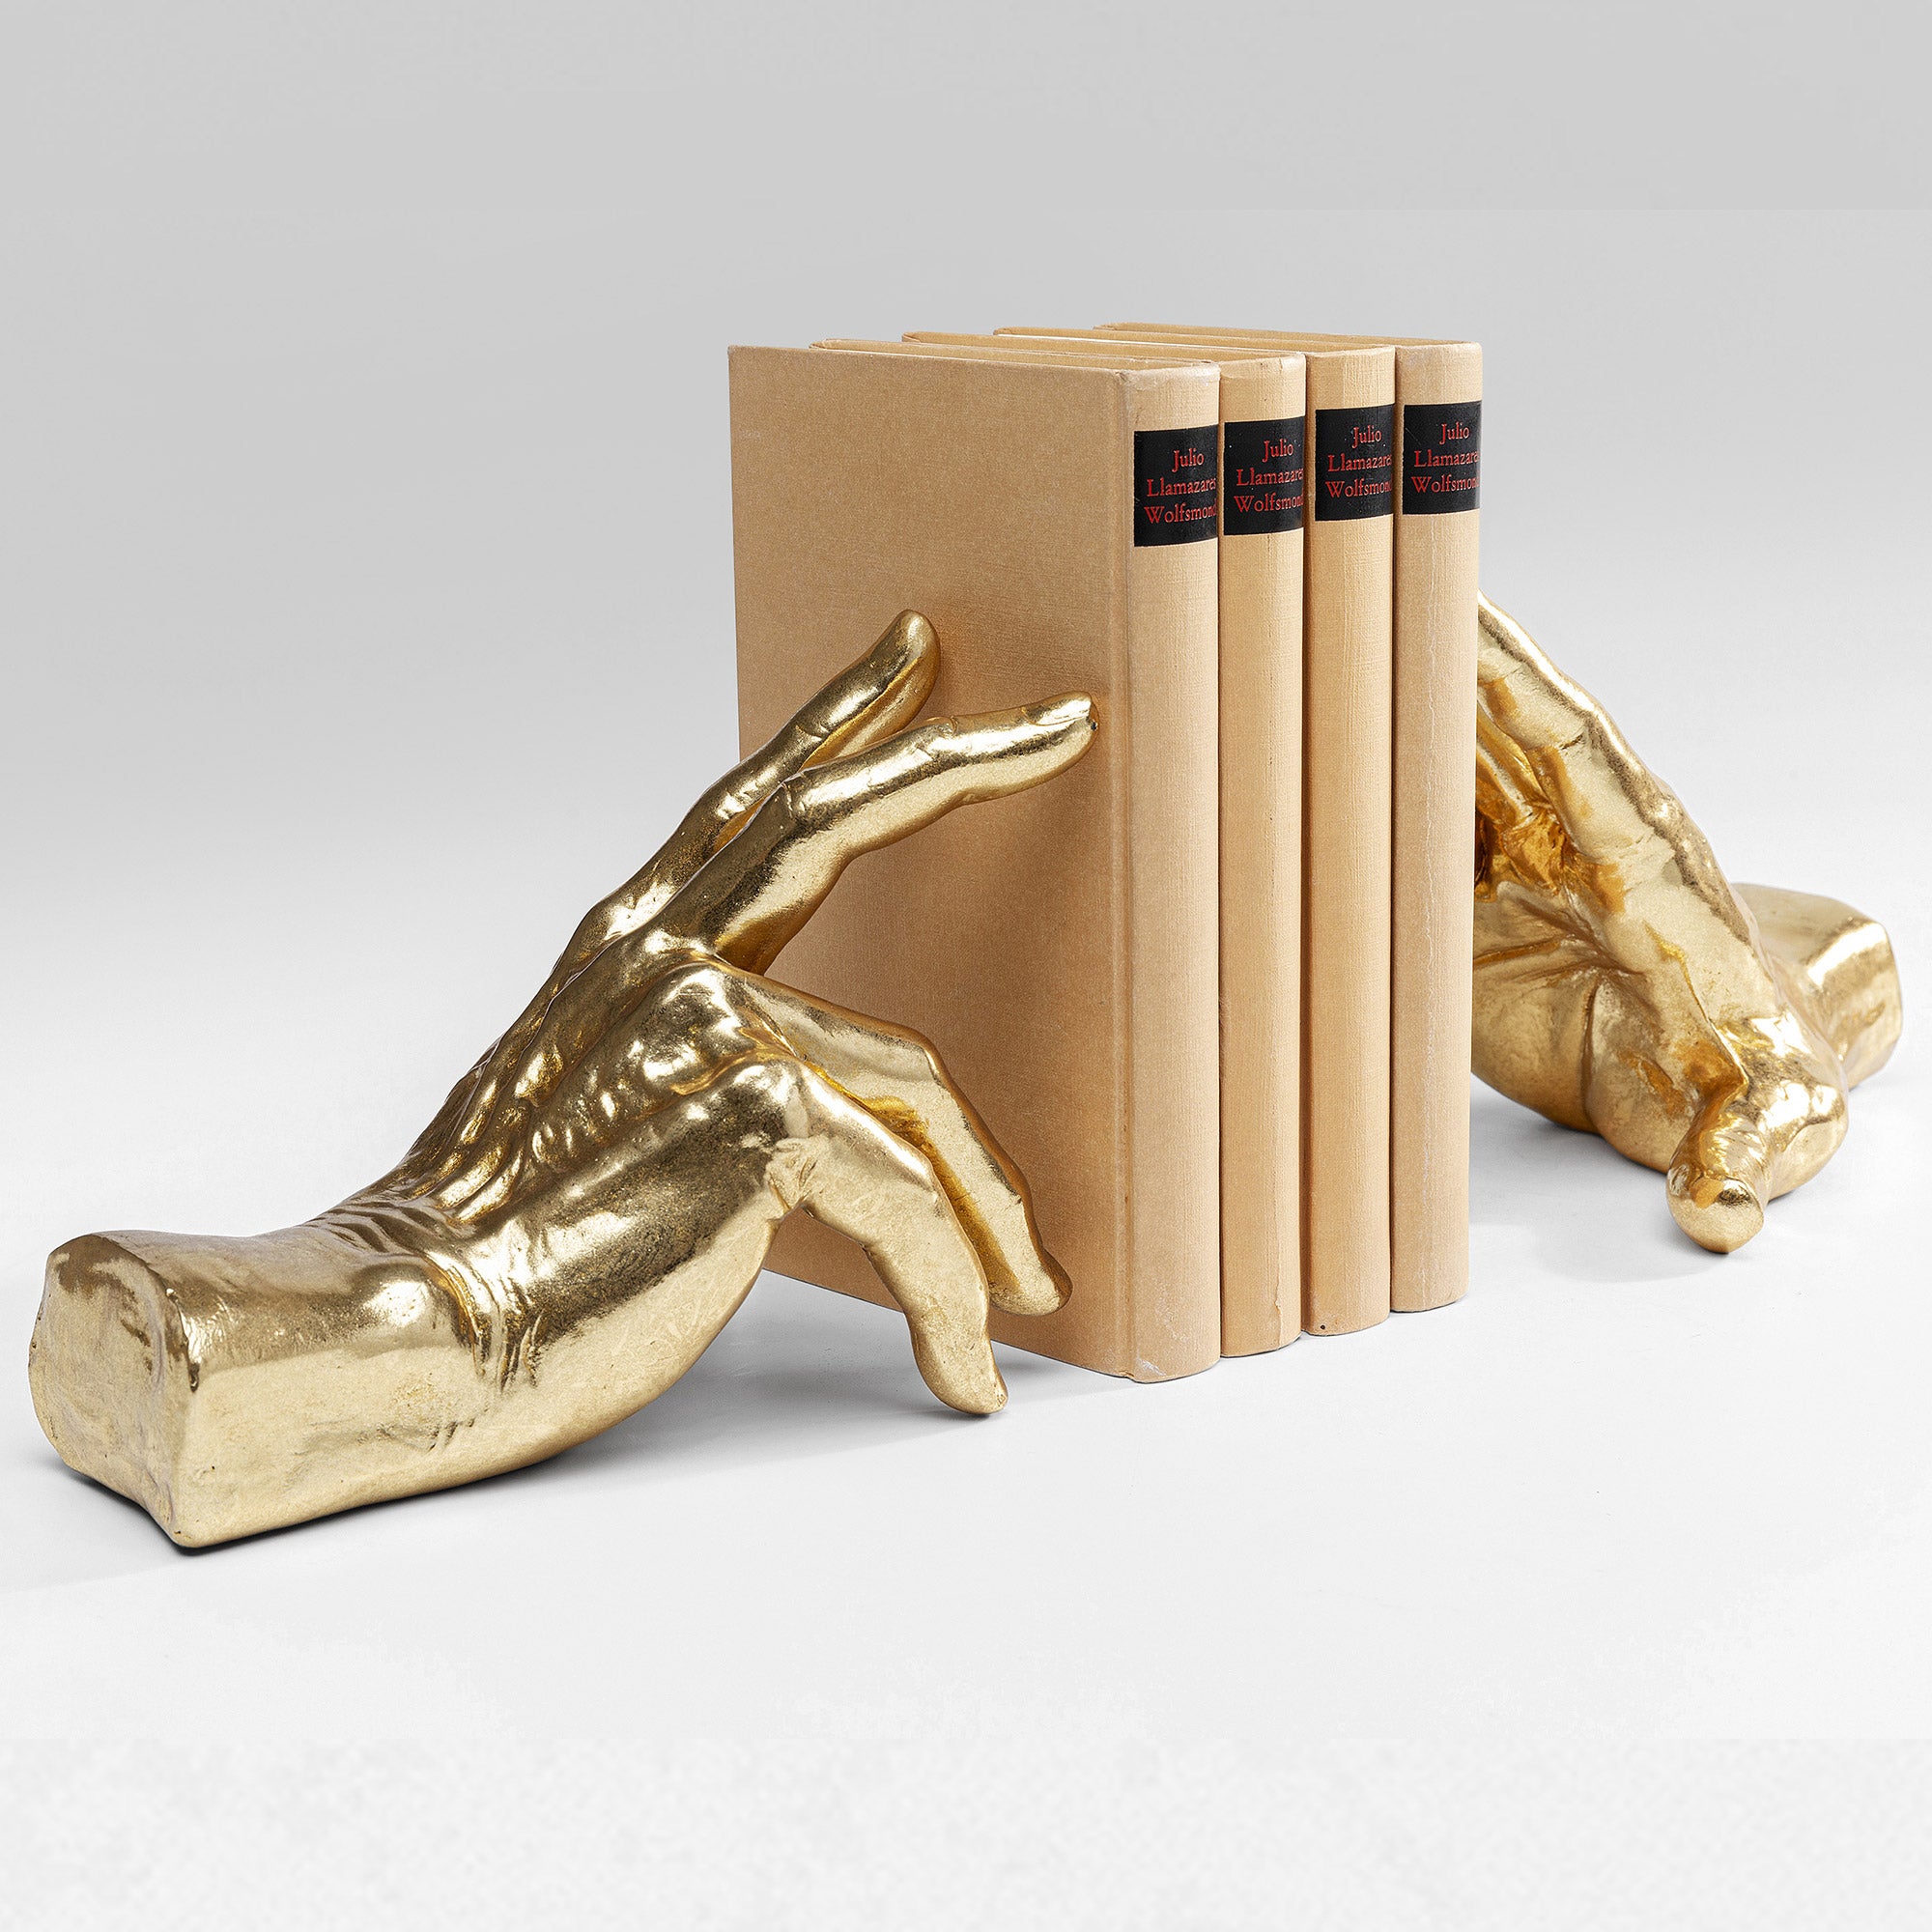 Supporting Hands Bookend - Set of 2